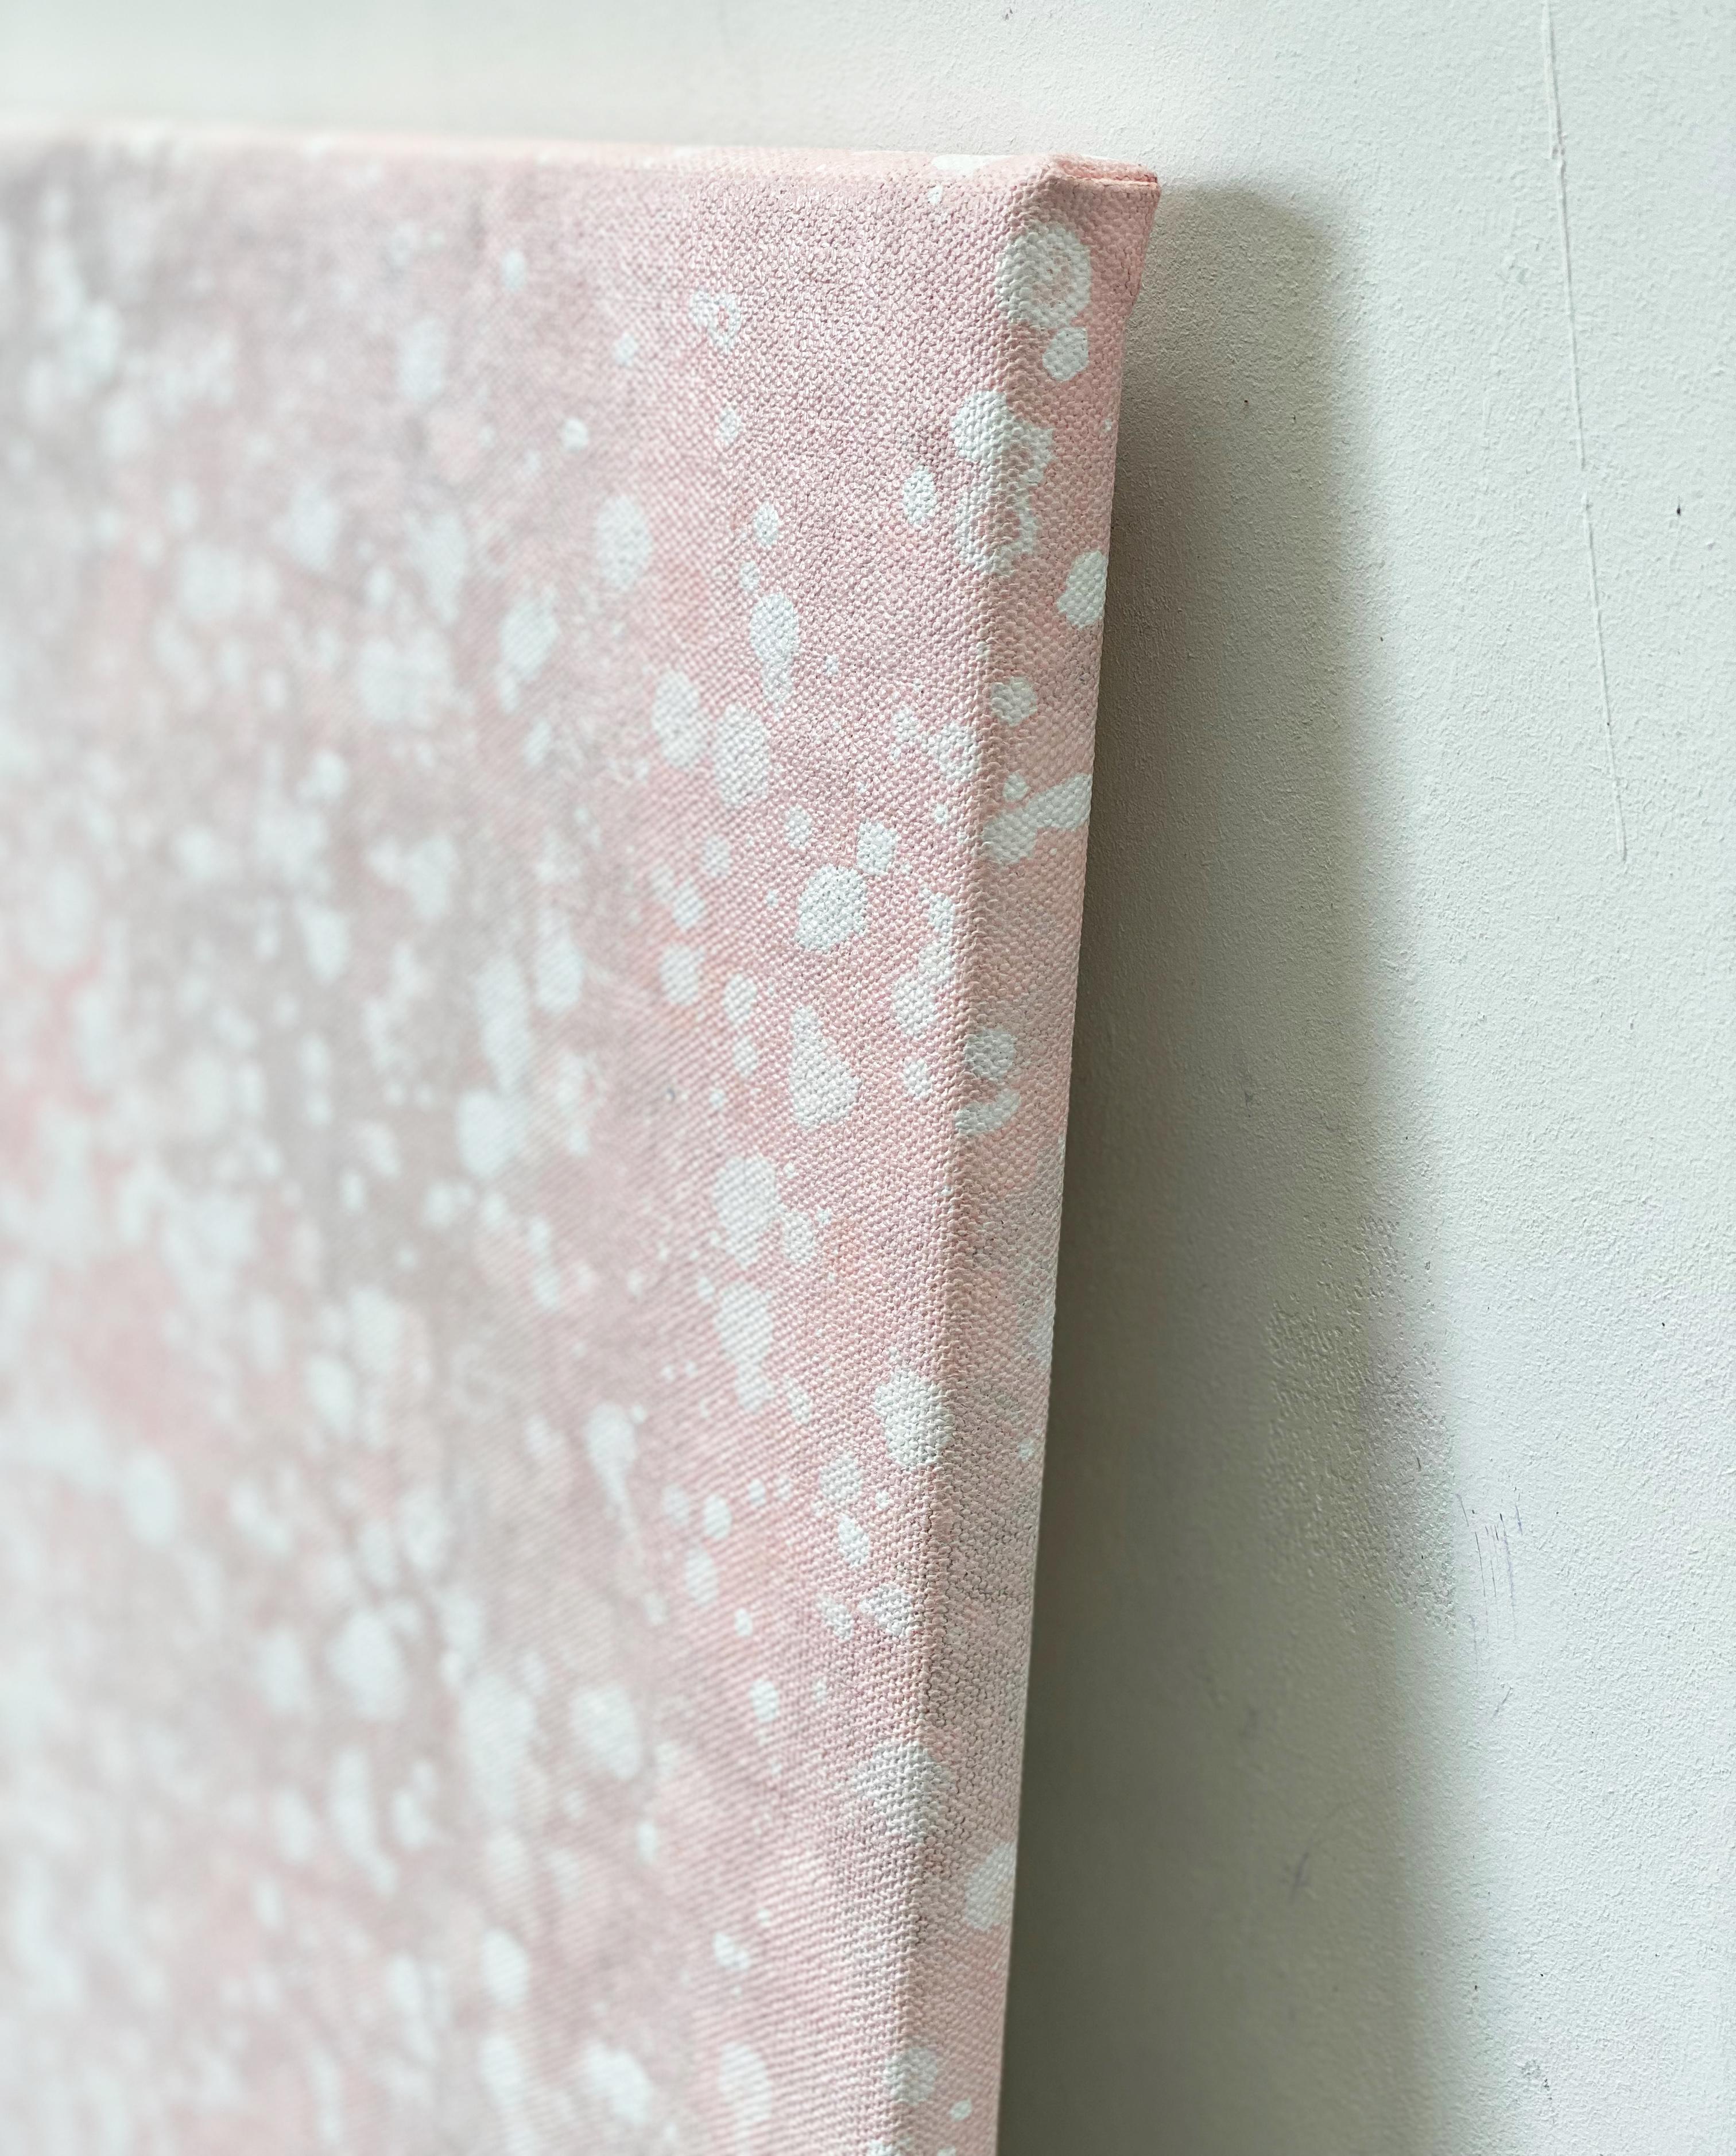 'Its snowing pastel pink' is a small stylised abstract work striving for minimalism in soft peaceful pastel tones and delicate textures.

One of threes works in the 'It's Snowing Series' an abstract expressionist collection of paintings reflecting